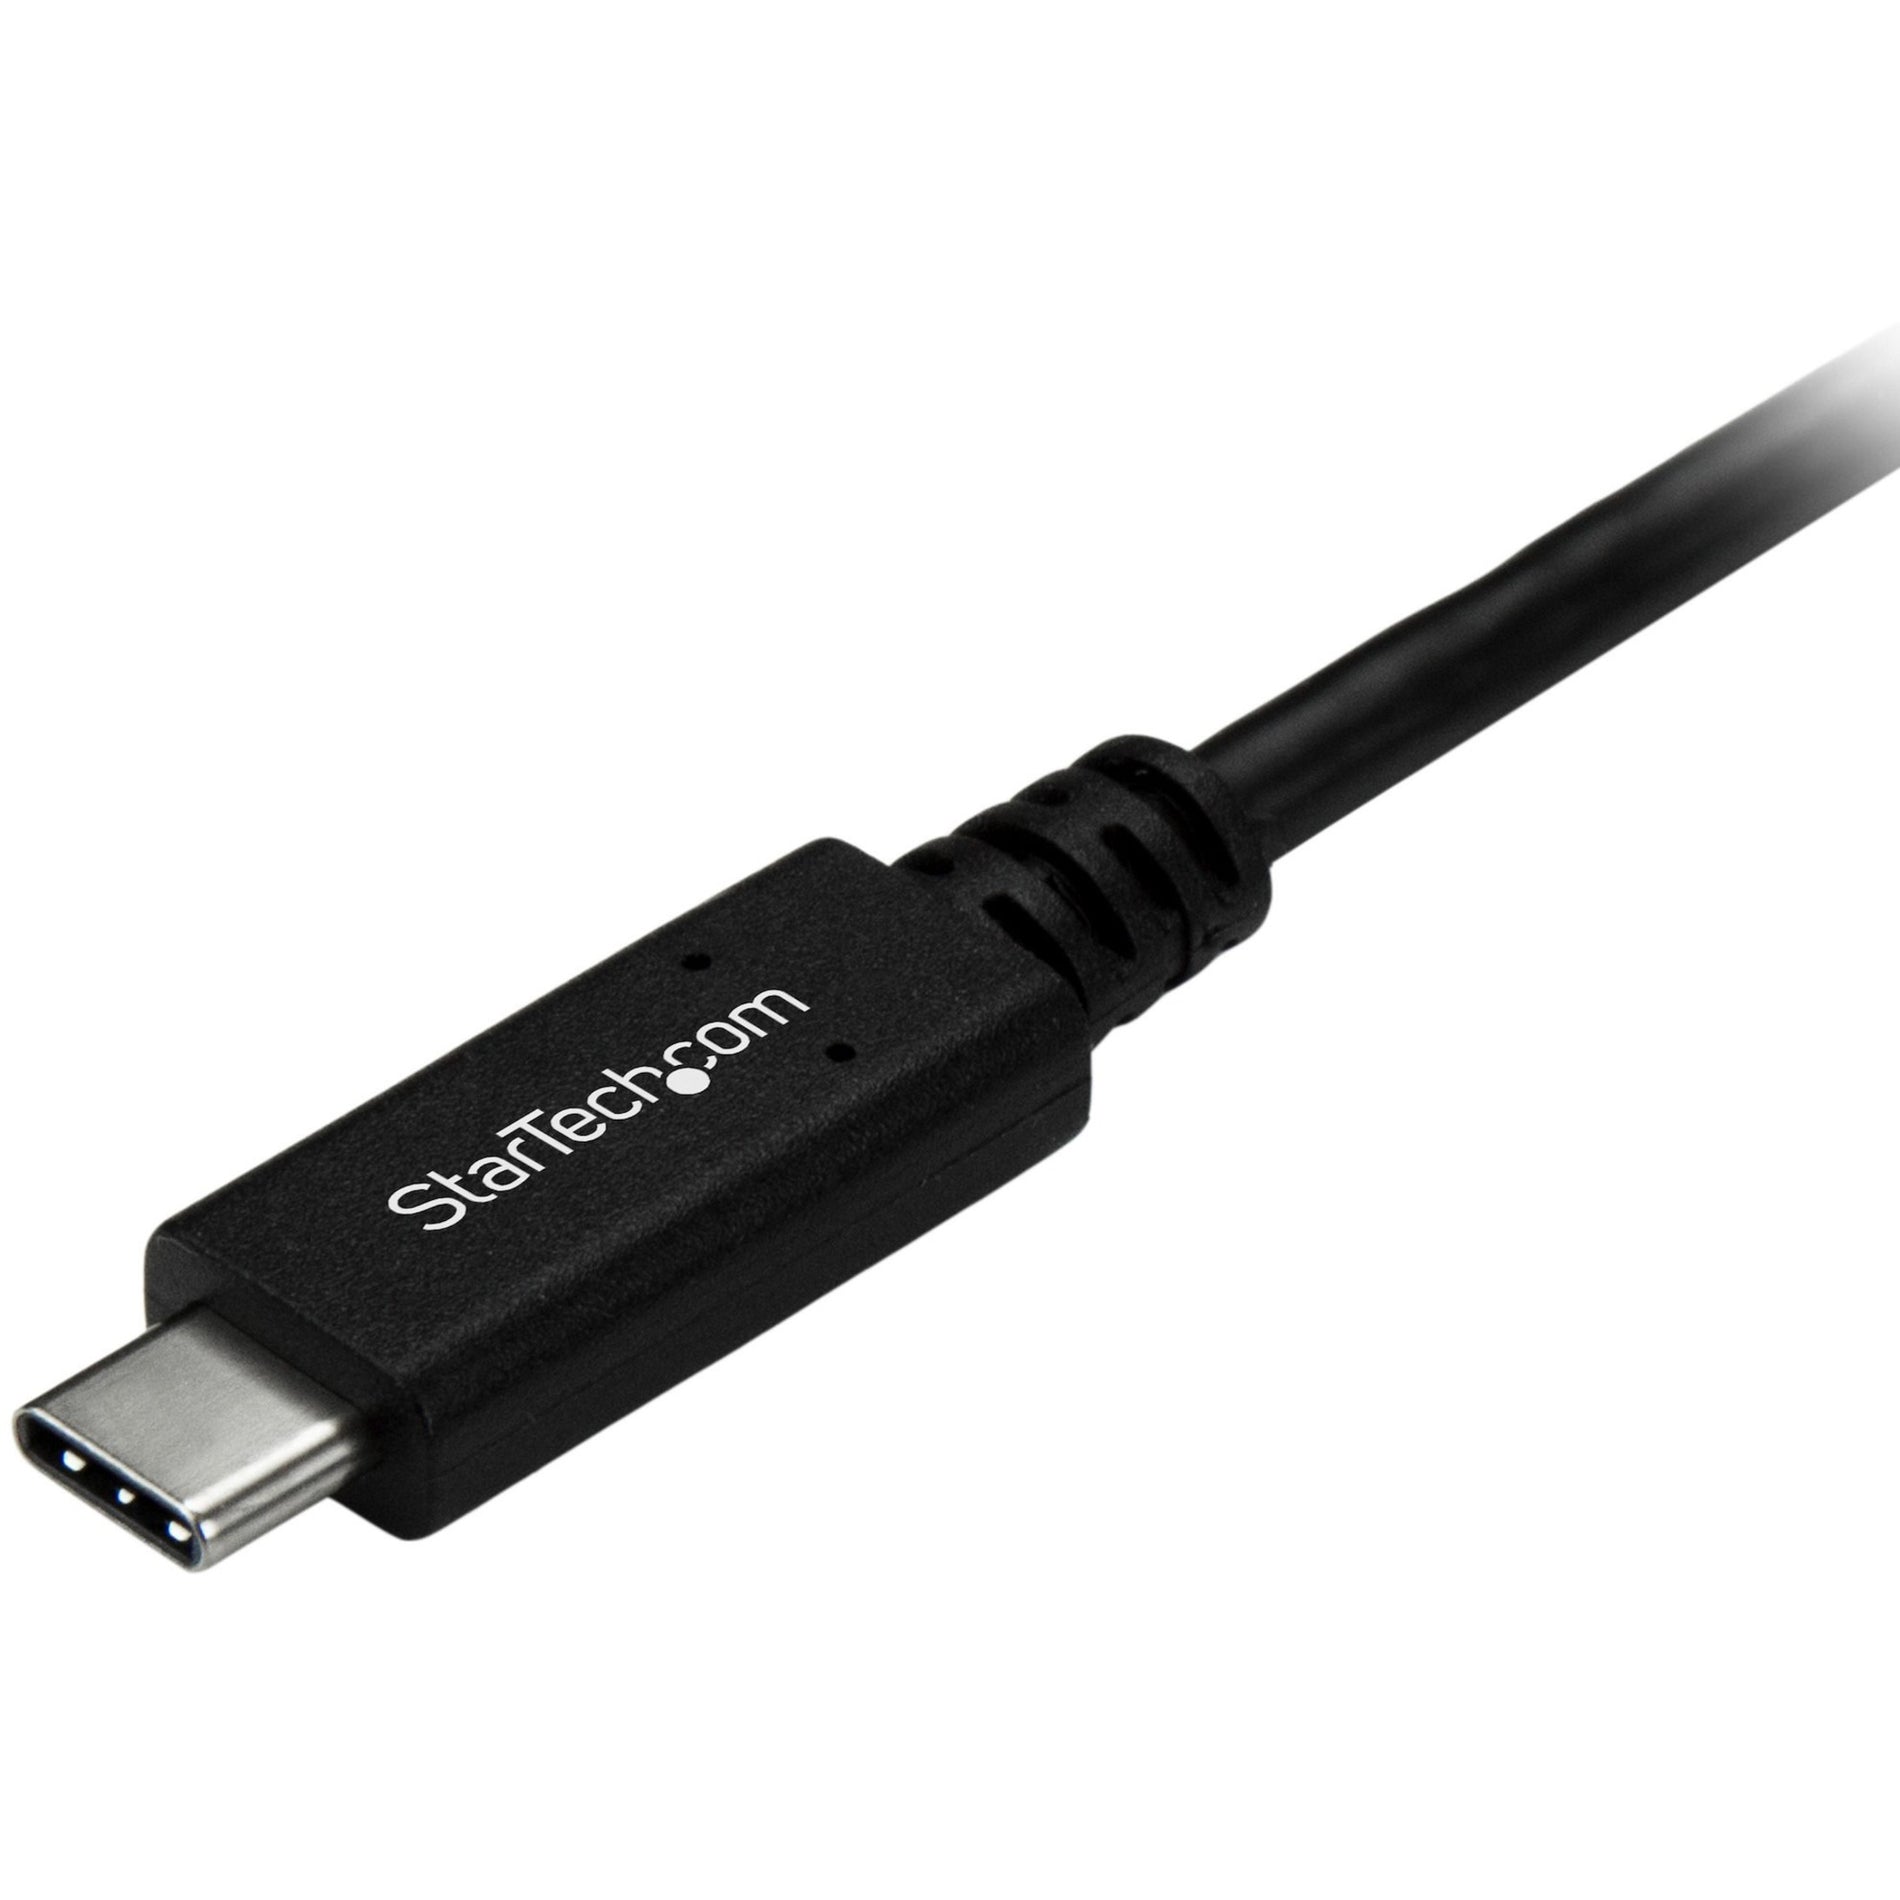 StarTech.com: StarTech.com USB315AC1M: USB315AC1M USB to USB-C Cable: Cavo USB a USB-C M/M: M/M 1m / 3 ft: 1m / 3 piedi USB 3.0: USB 3.0 5Gbps: 5Gbps Charging: Ricarica